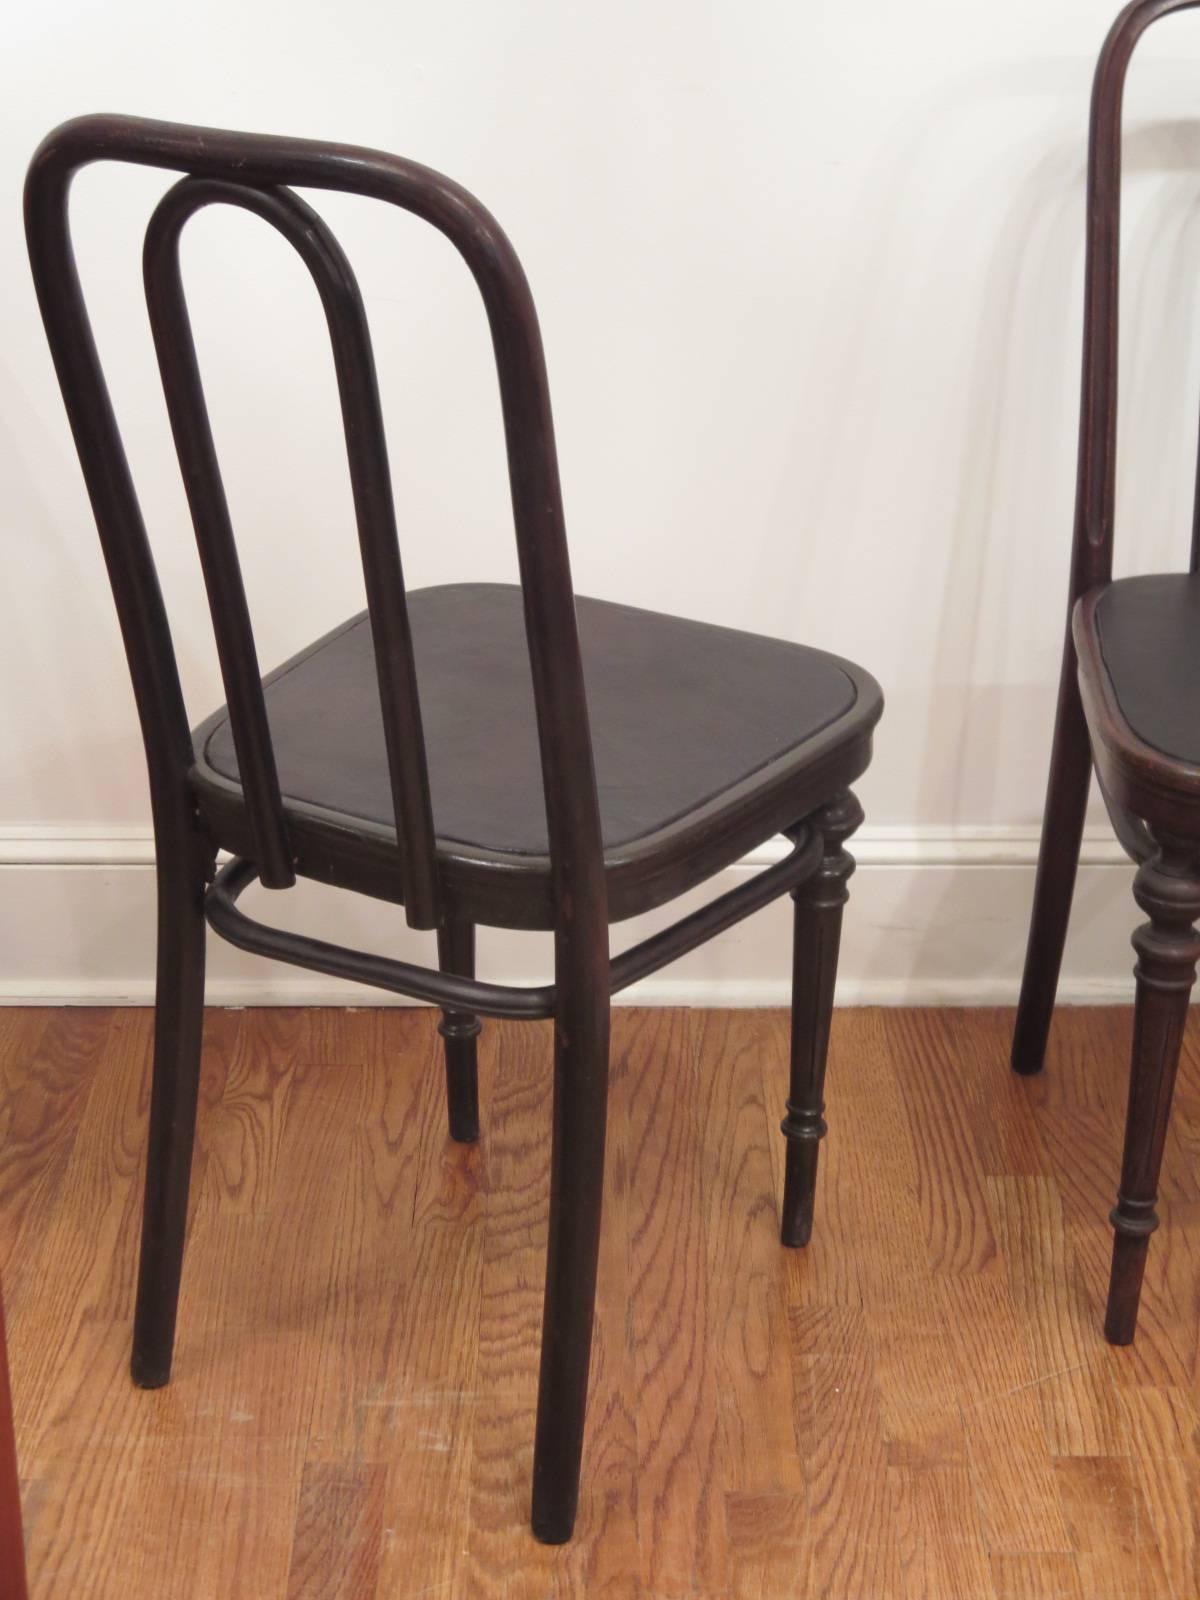 Art Nouveau Pair of Chairs 41 by Thonet